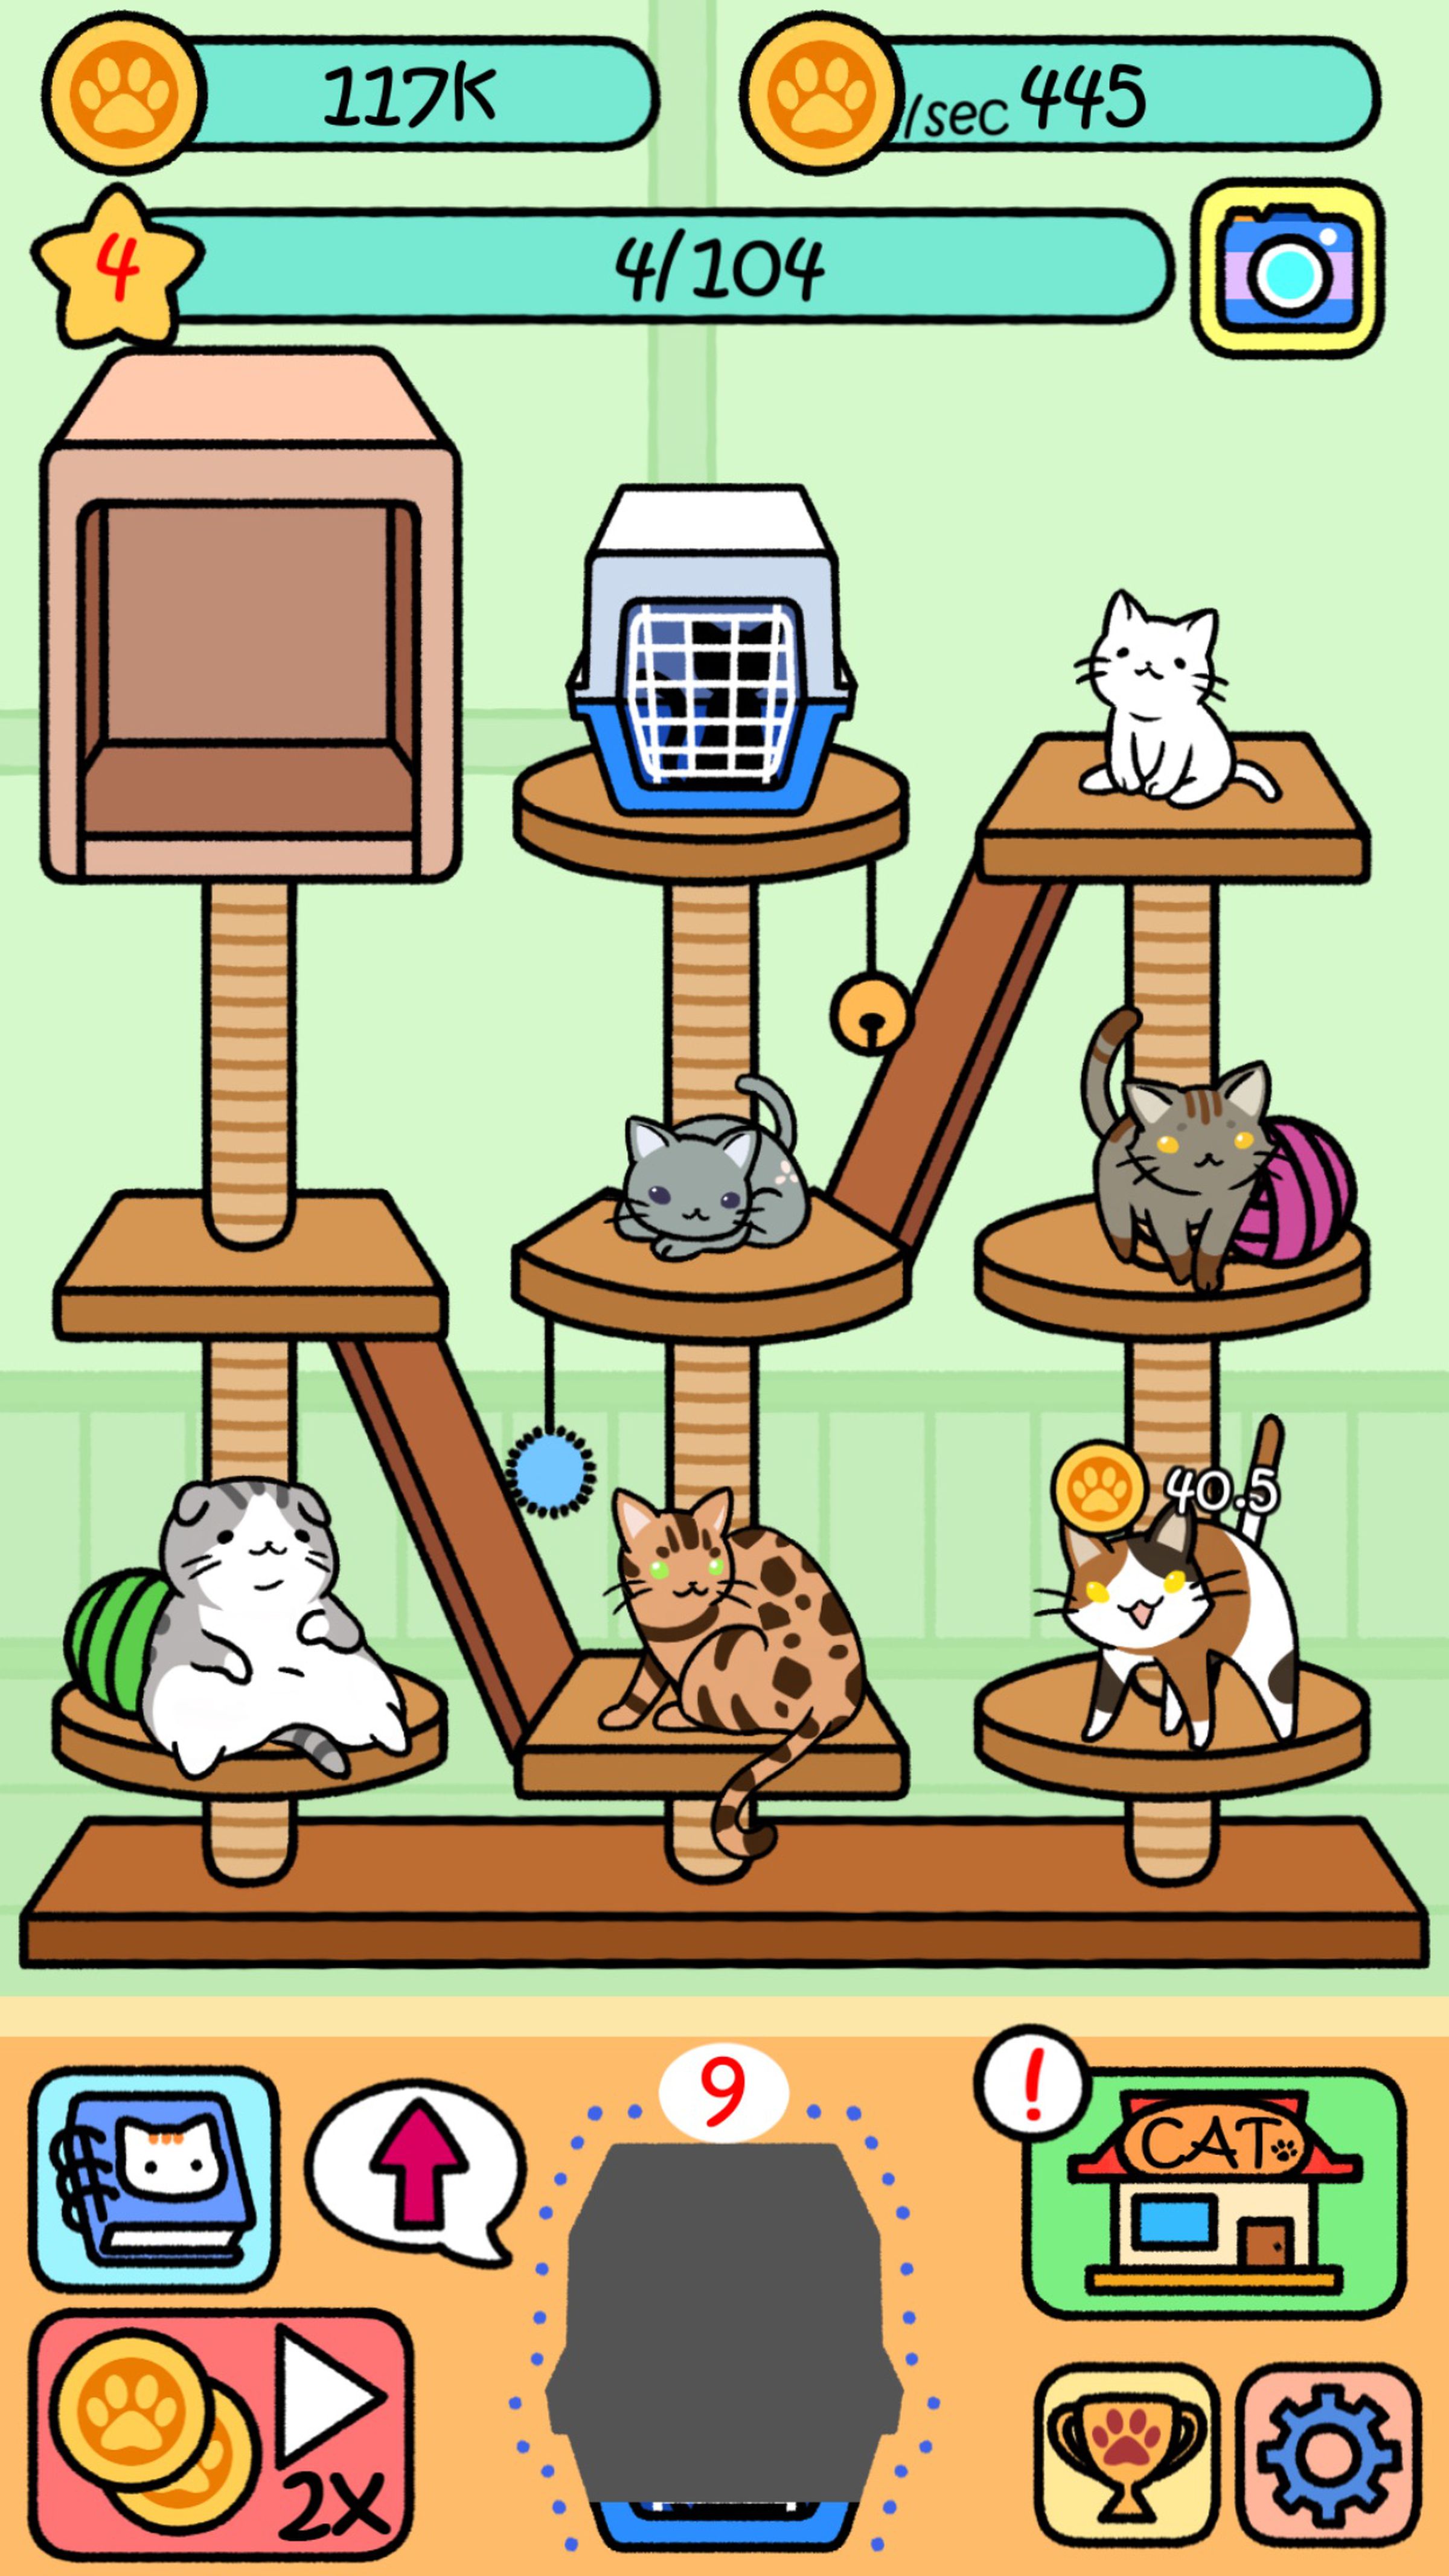 When I first started the game, the Scottish Fold was my pride and glory.